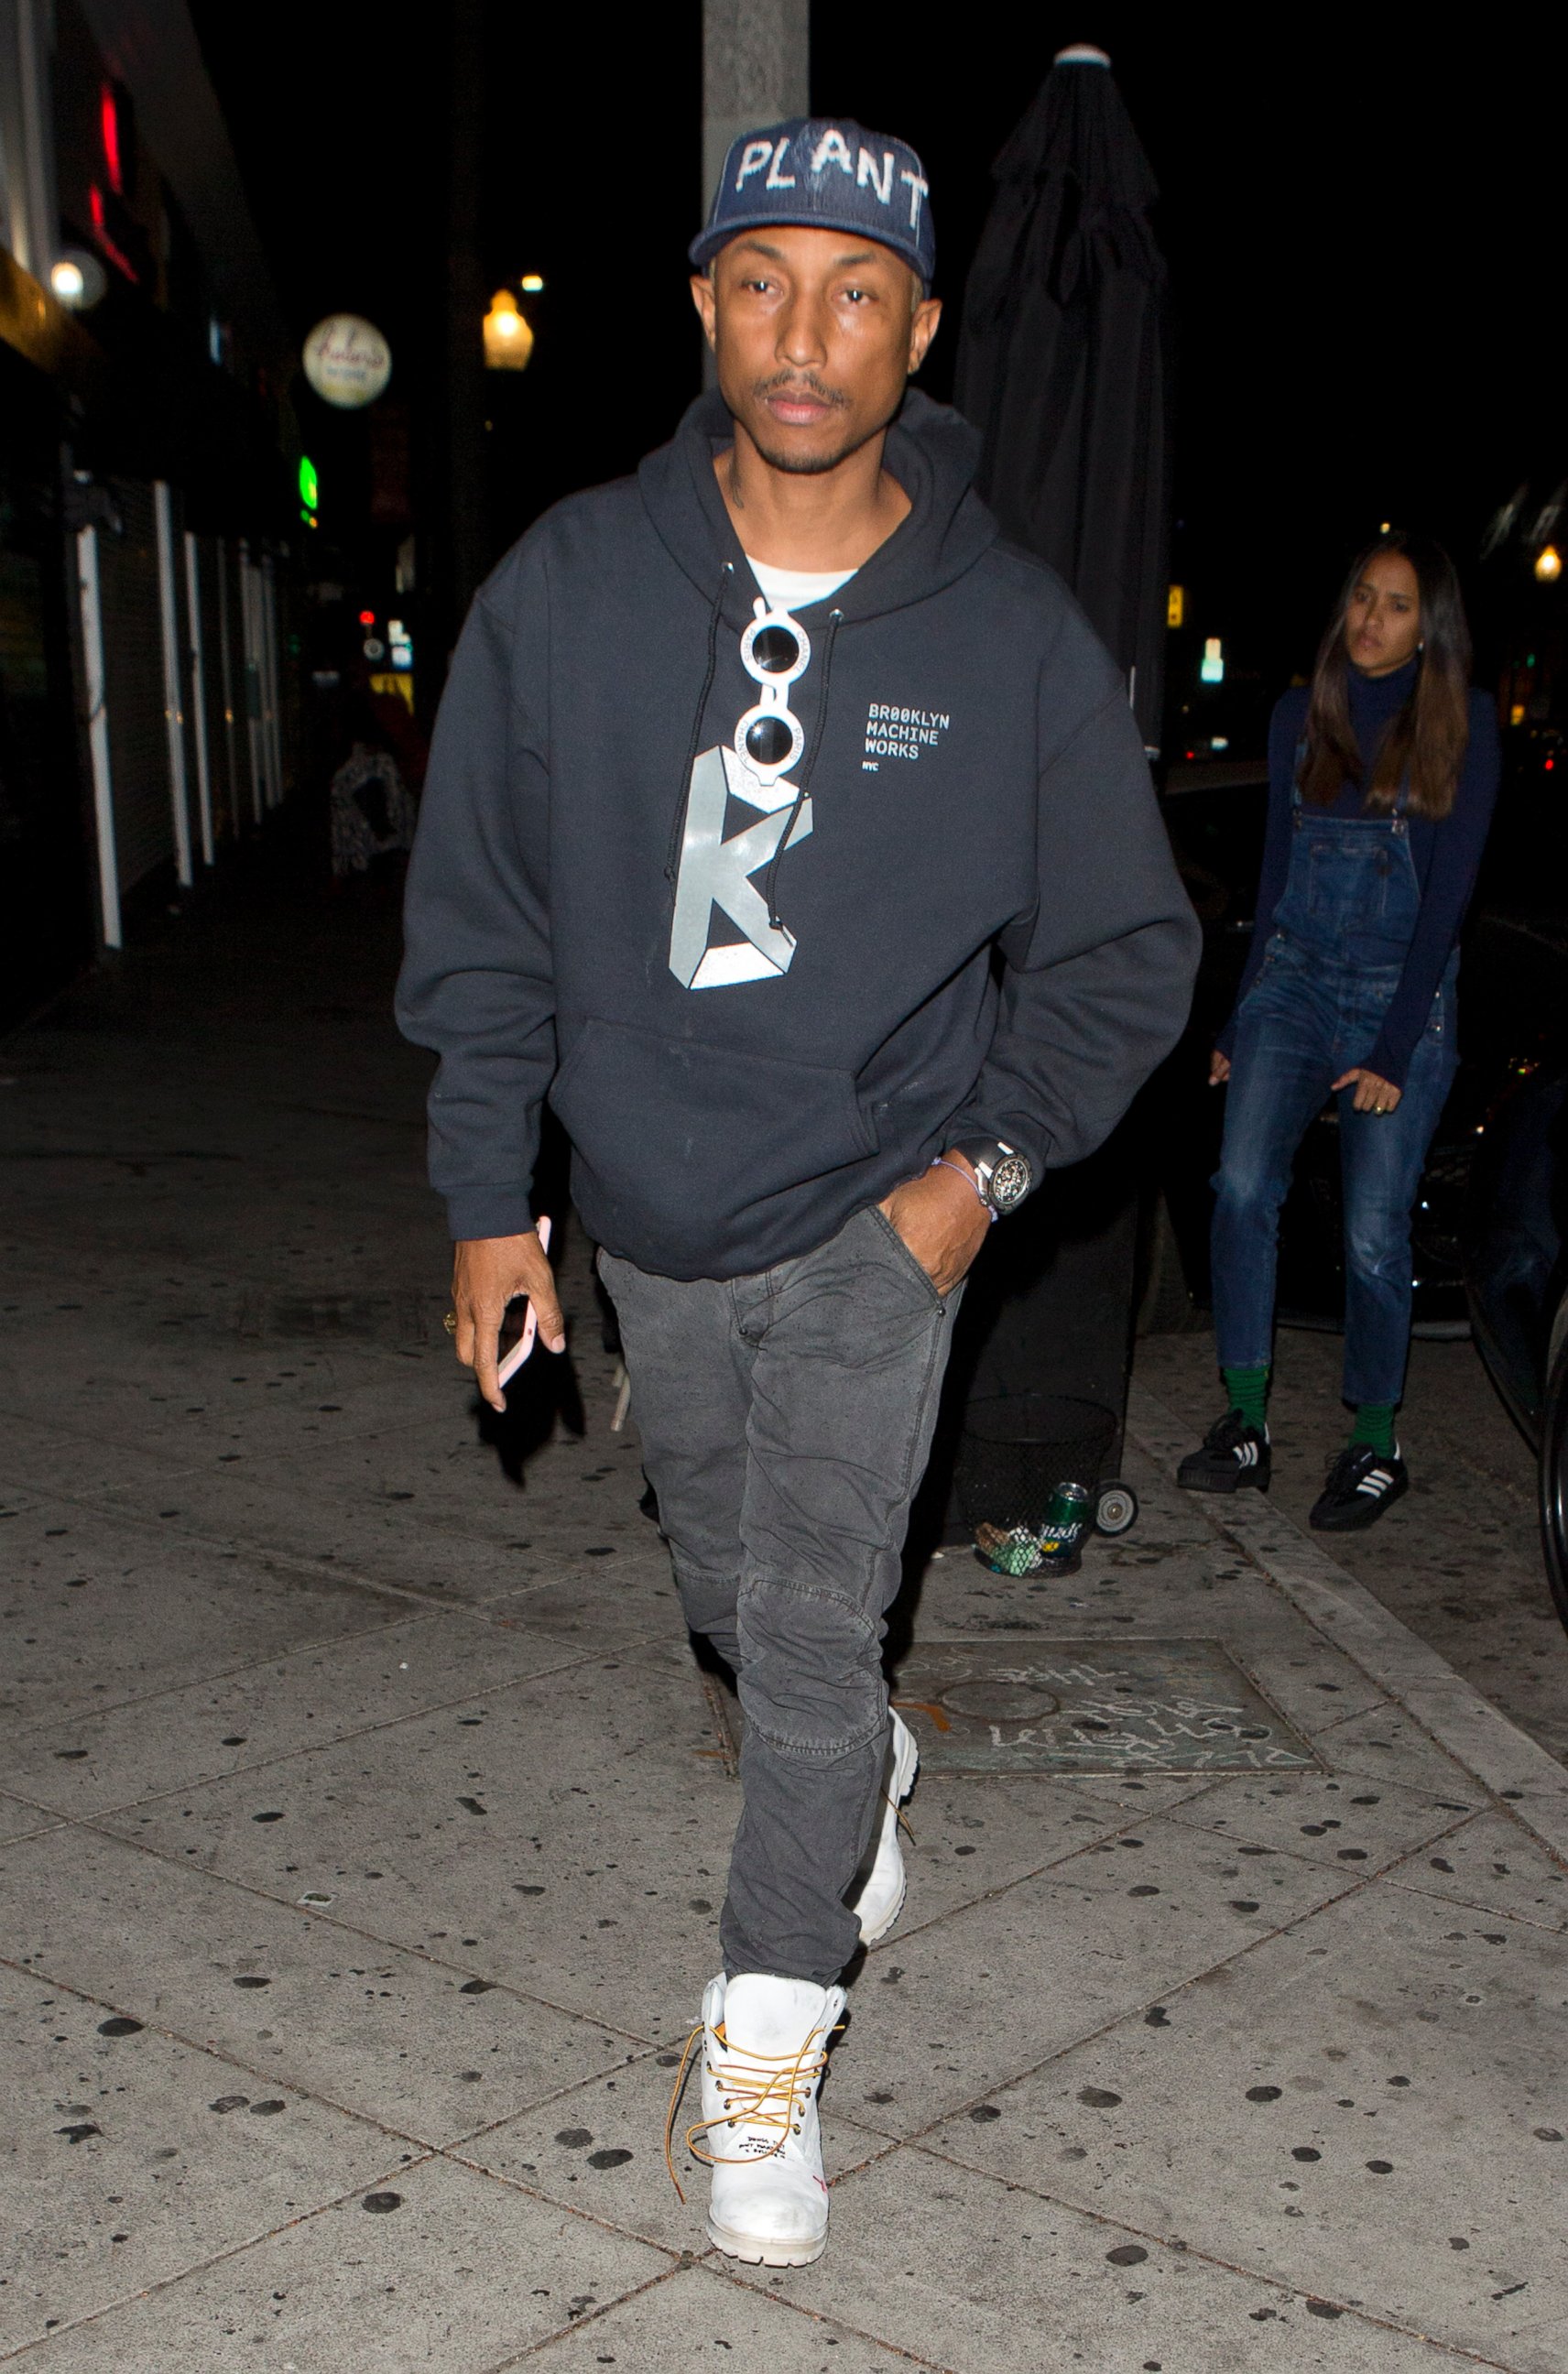 PHOTO:Pharrell Williams was seen at 'Lady Gaga's' private birthday party at 'No Name' Restaurant in Los Angeles.